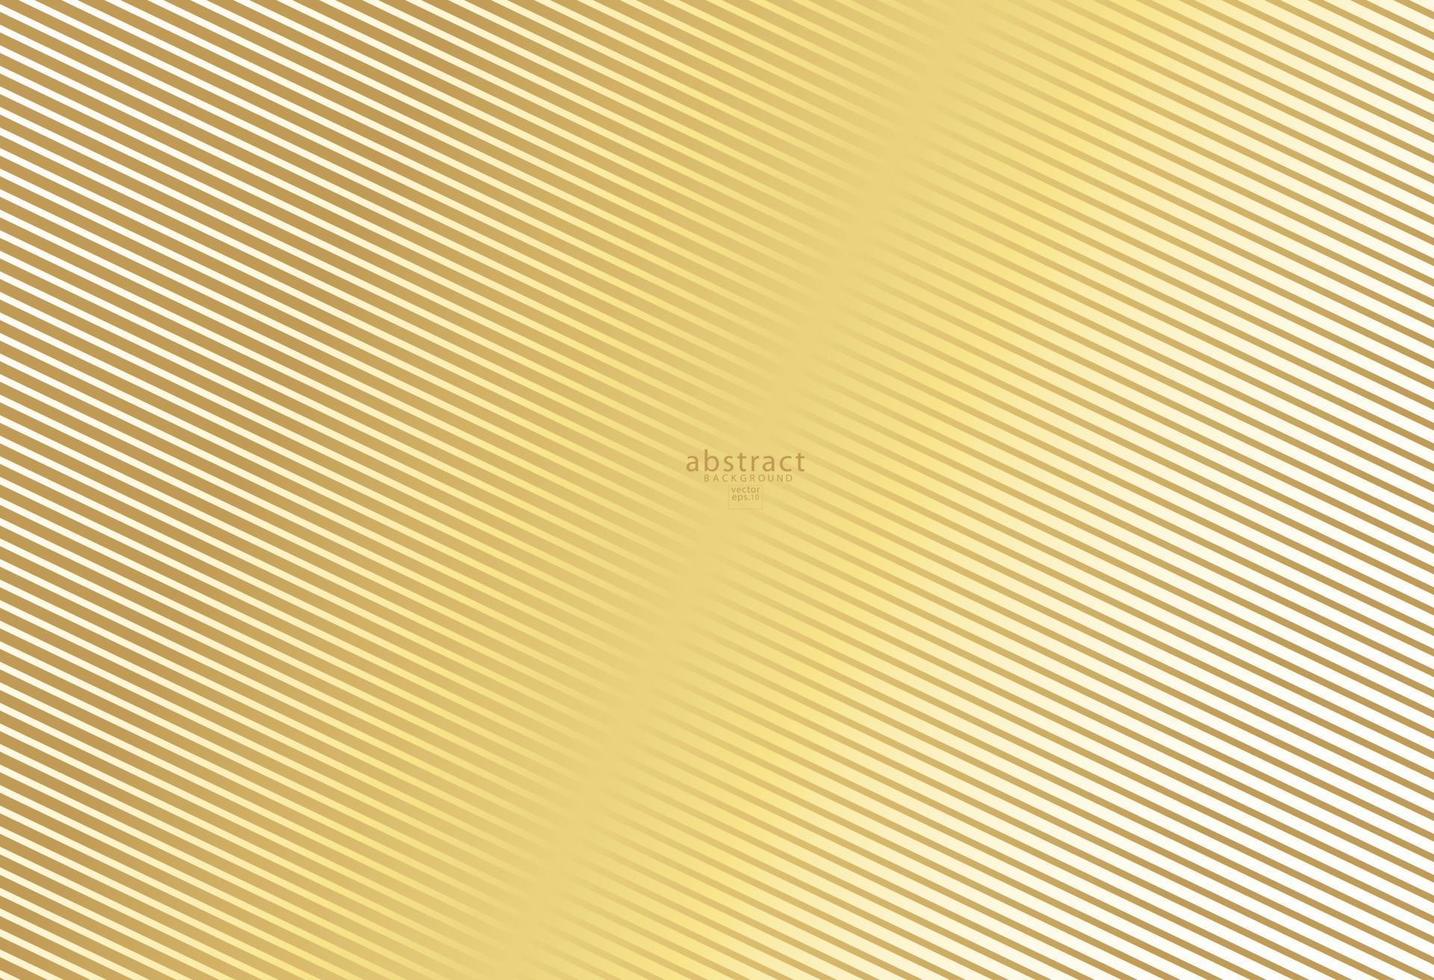 Abstract gold luxurious line Stripe background - simple texture for your ideas design. gradient background. Modern decoration for websites, posters, banners, template EPS10 vector